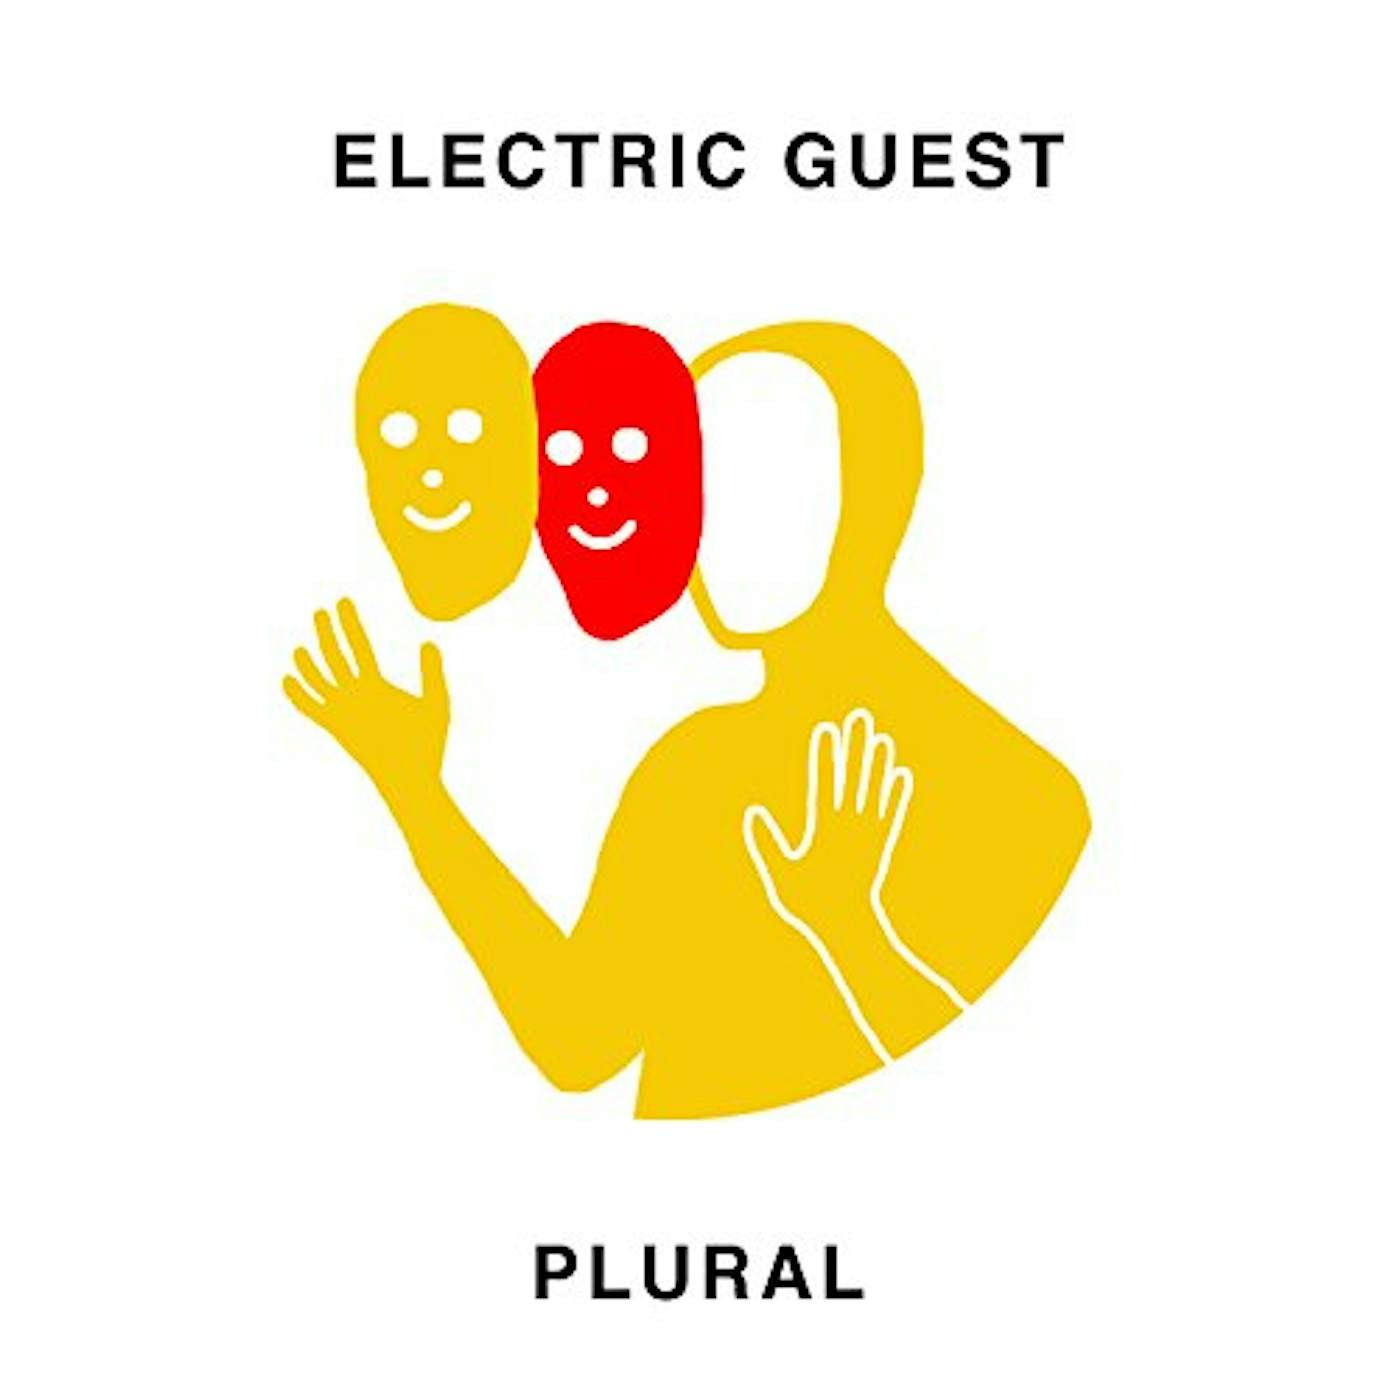 Electric Guest PLURAL CD